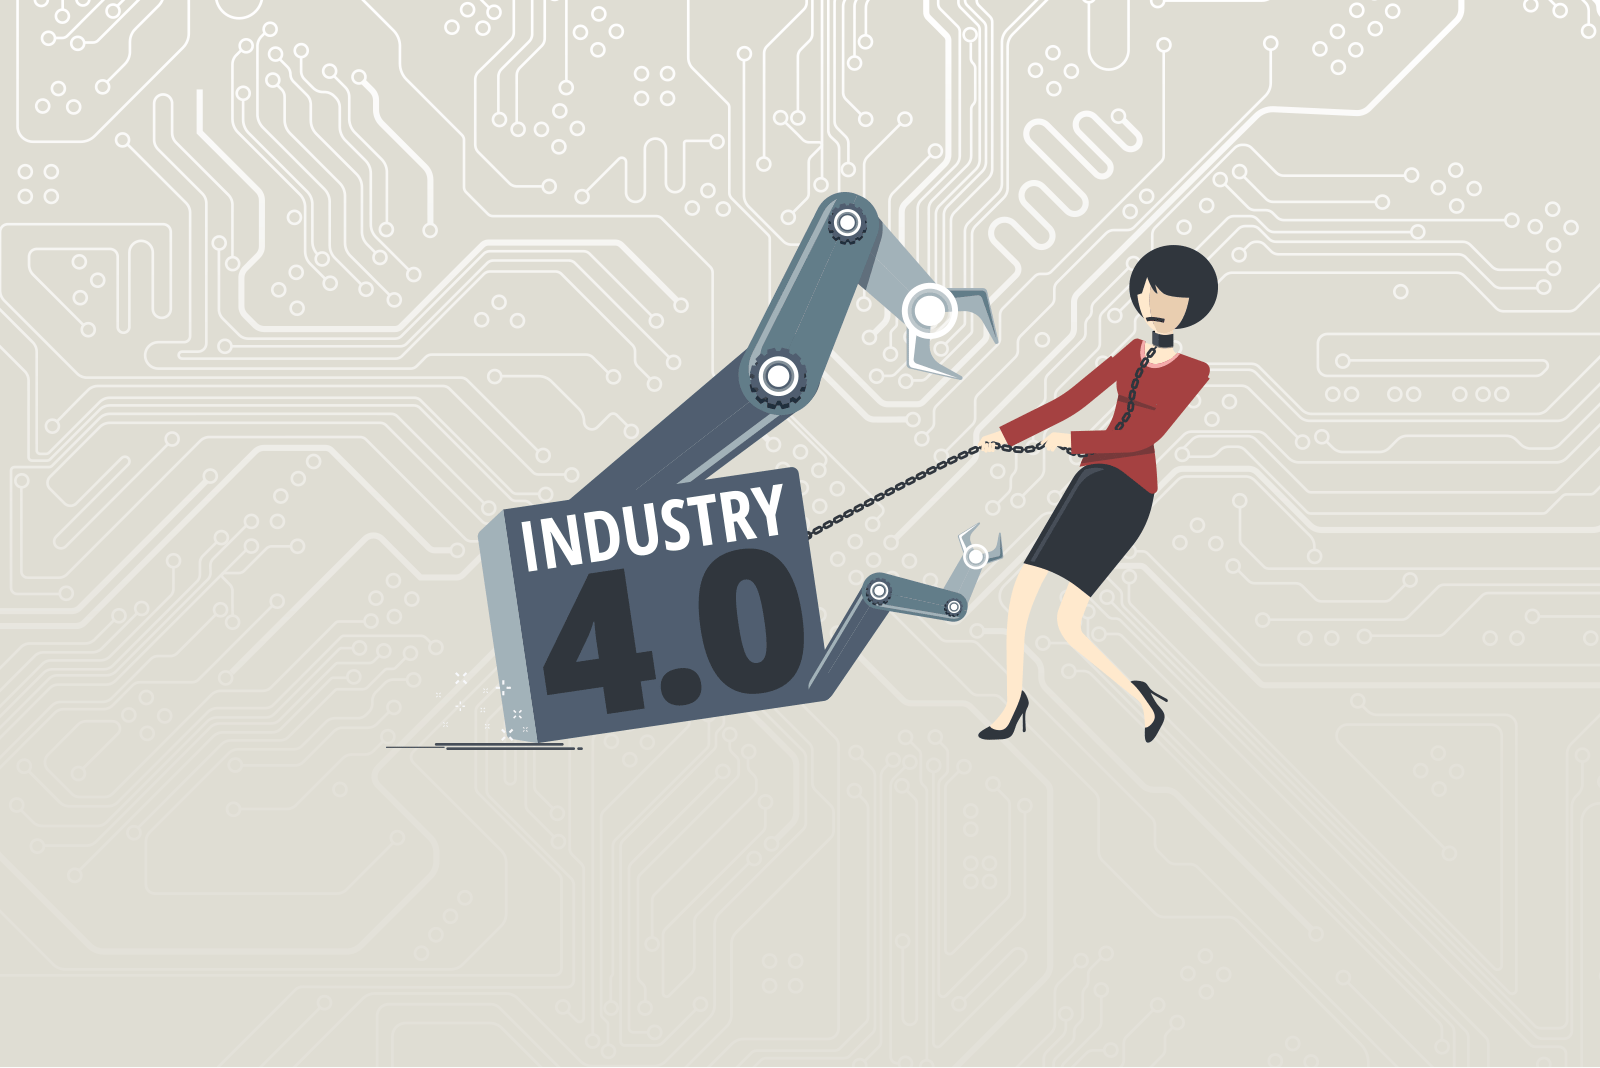 Industry 4.0: Illustrations shows fear of keeping control of their jobs in times of digitisation